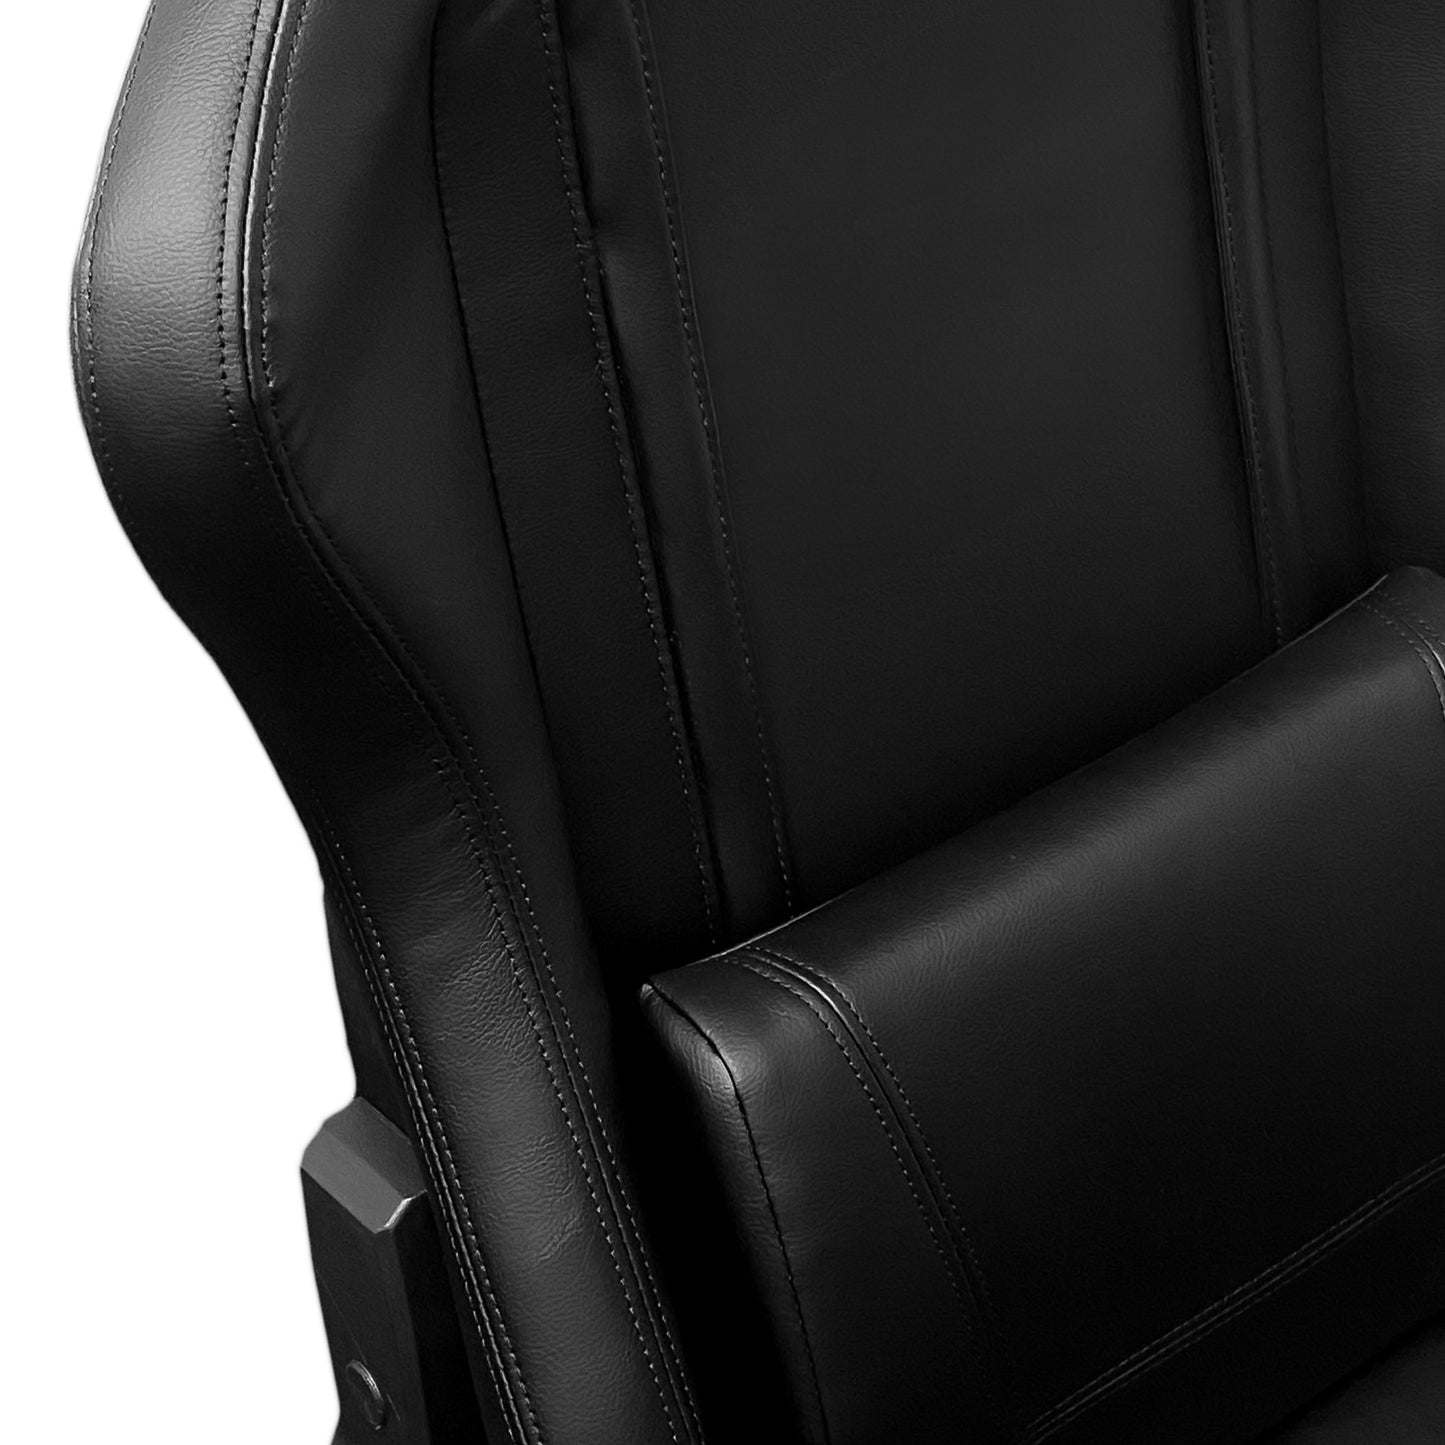 Xpression Pro Gaming Chair with  New York Jets Primary Logo